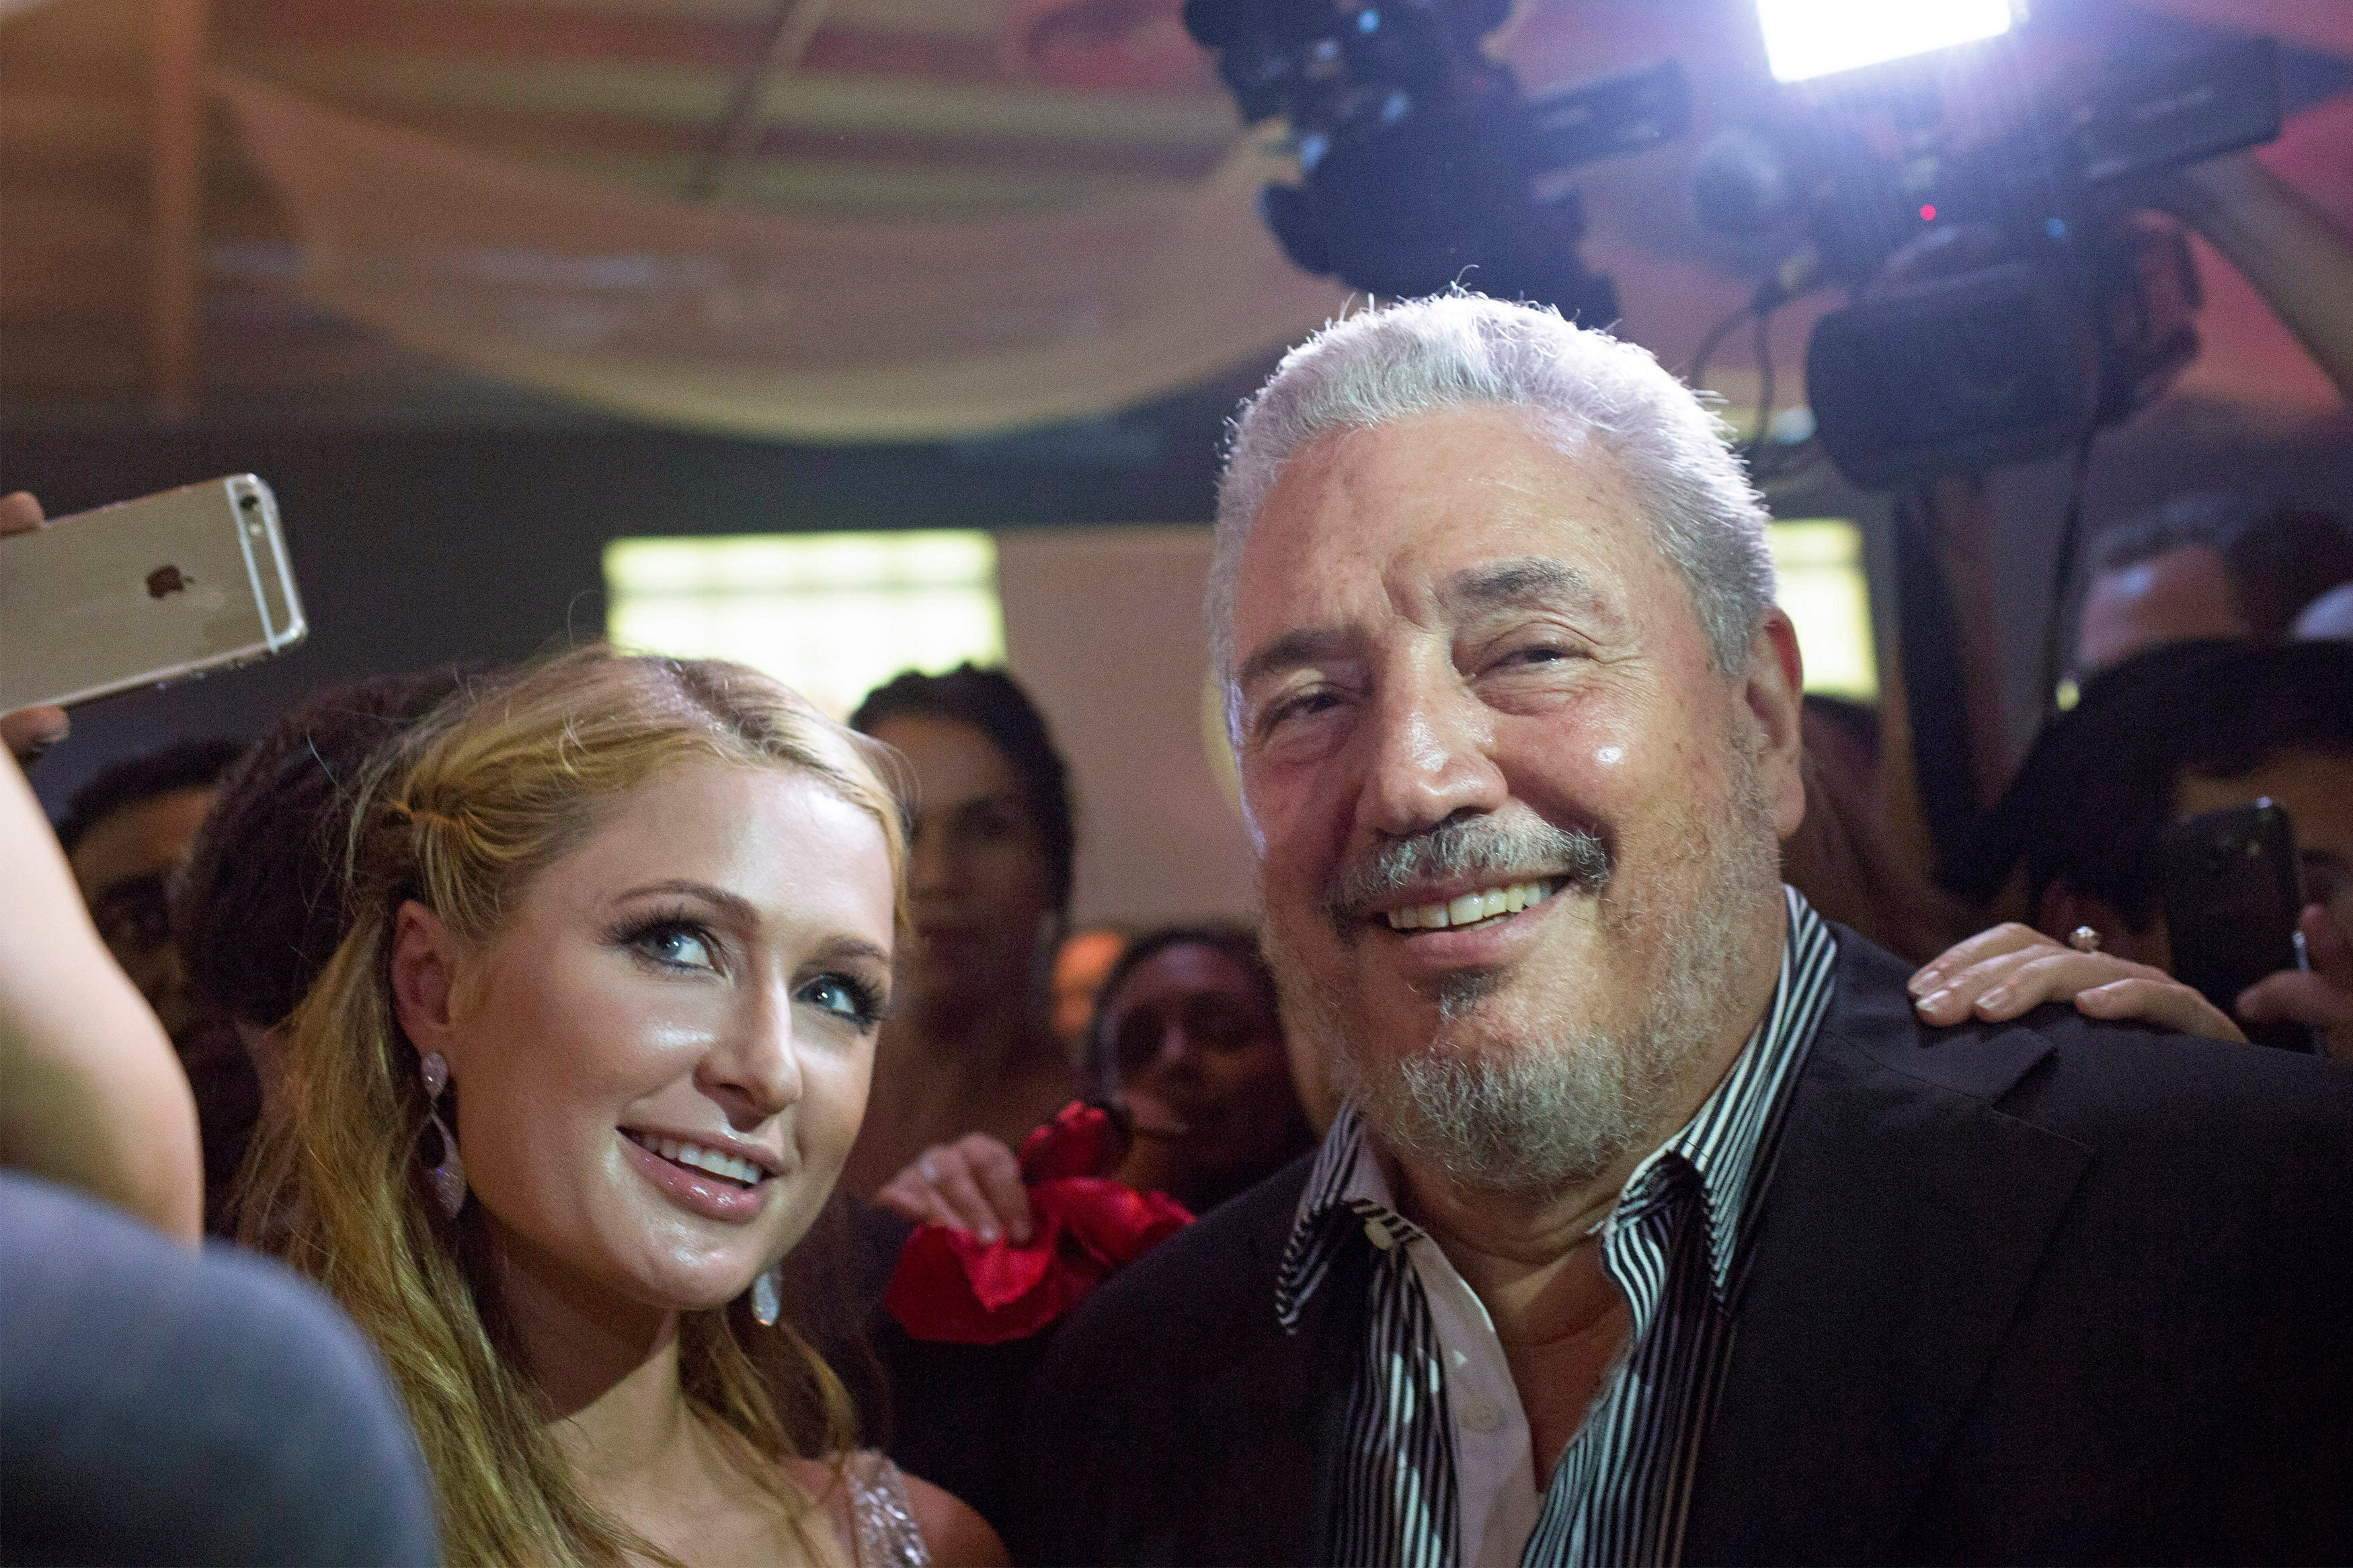 Fidel Castro Diaz-Balart, son of former Cuban leader Fidel Castro, poses with US socialite Paris Hilton as she takes a selfie during the gala dinner at the closing of the XVII Habanos Festival, in Havana, on February 27, 2015. Photo: Reuters